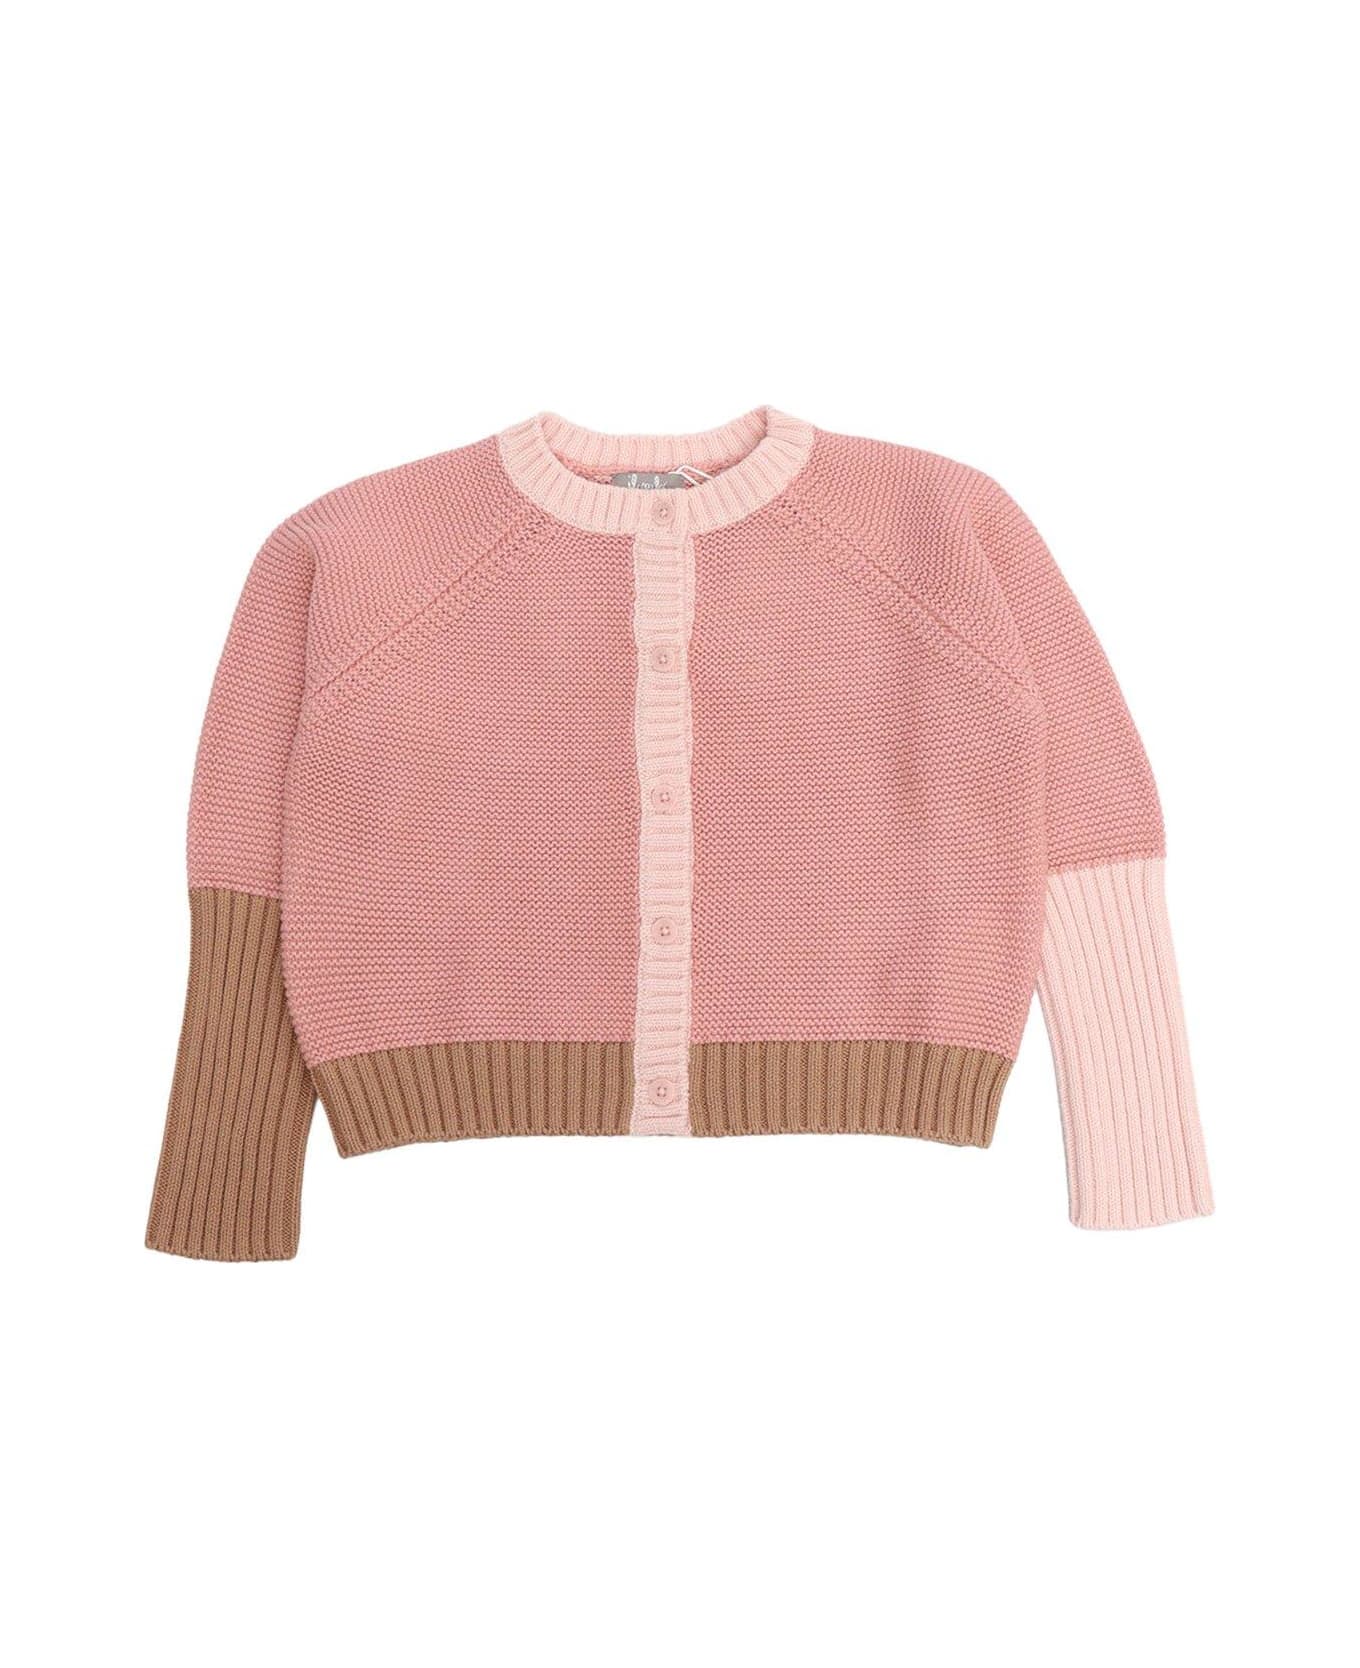 Il Gufo Long Sleeved Knitted Cardigan - Rosa